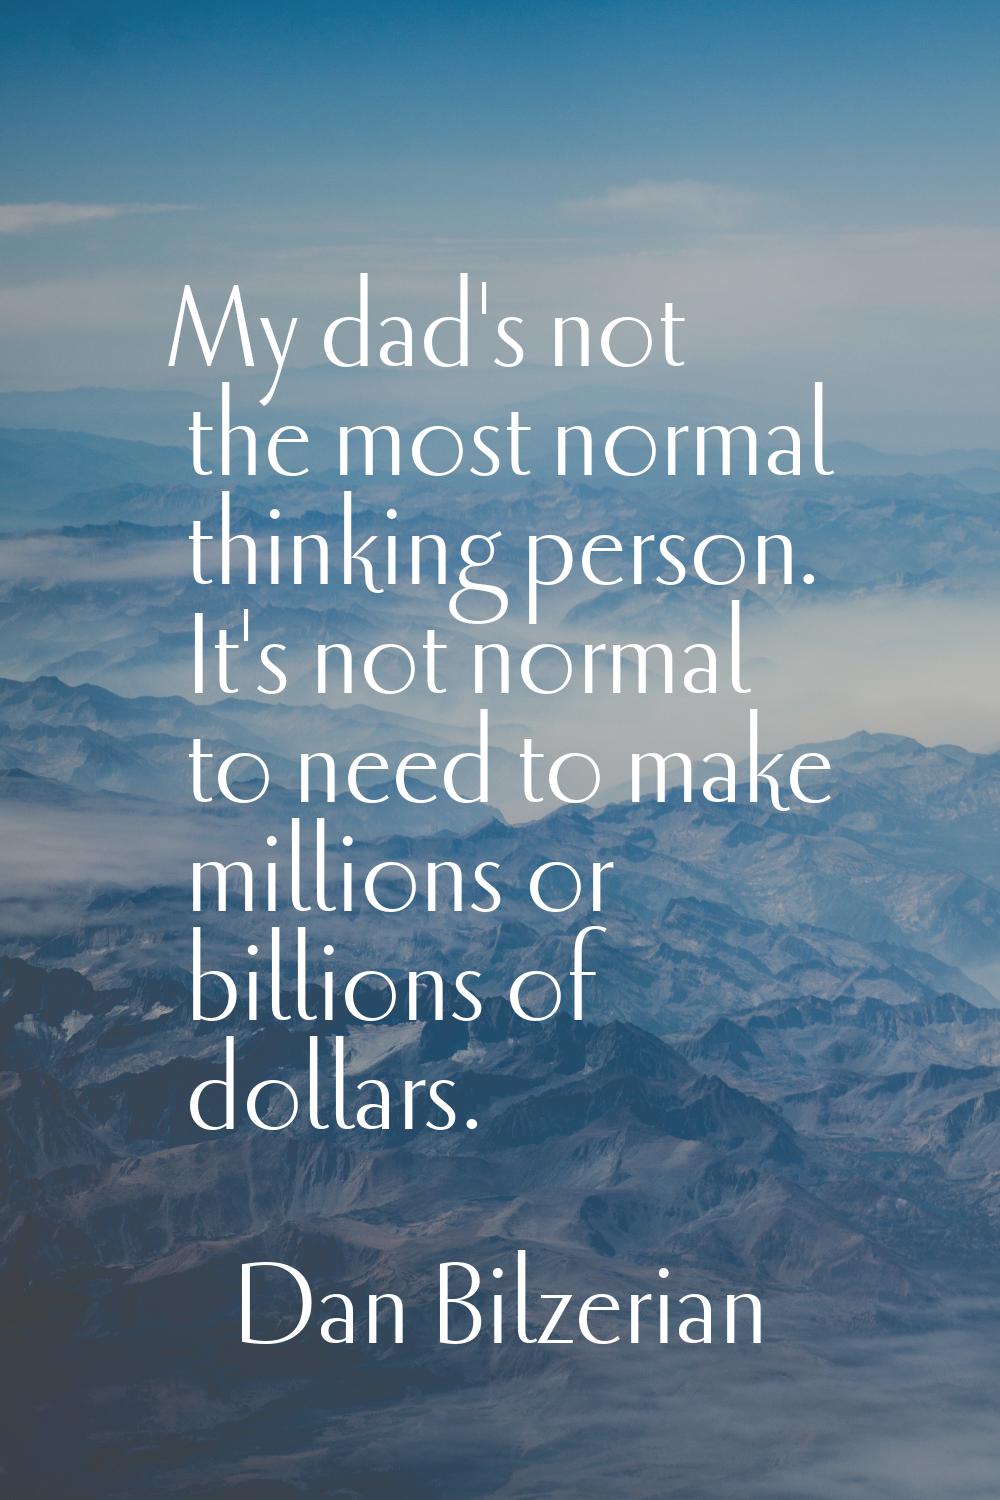 My dad's not the most normal thinking person. It's not normal to need to make millions or billions 